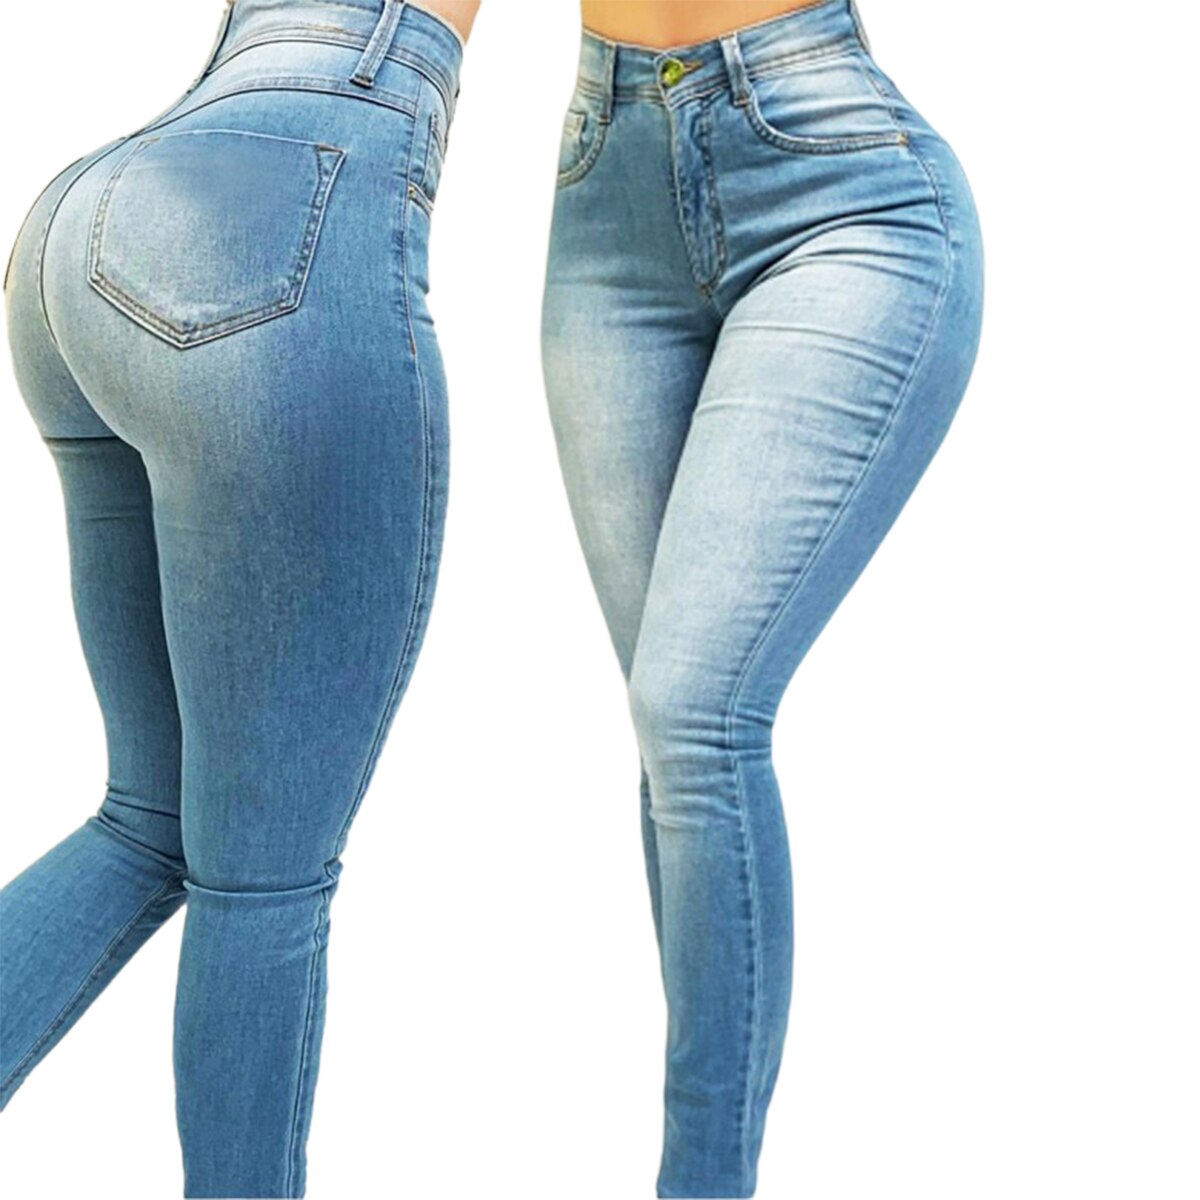 Women High Stretch Skinny Denim Jeans Cropped Pencil Pants Washed High Waist Demin Jeggings Ladies Spring Autumn Trousers Jeans